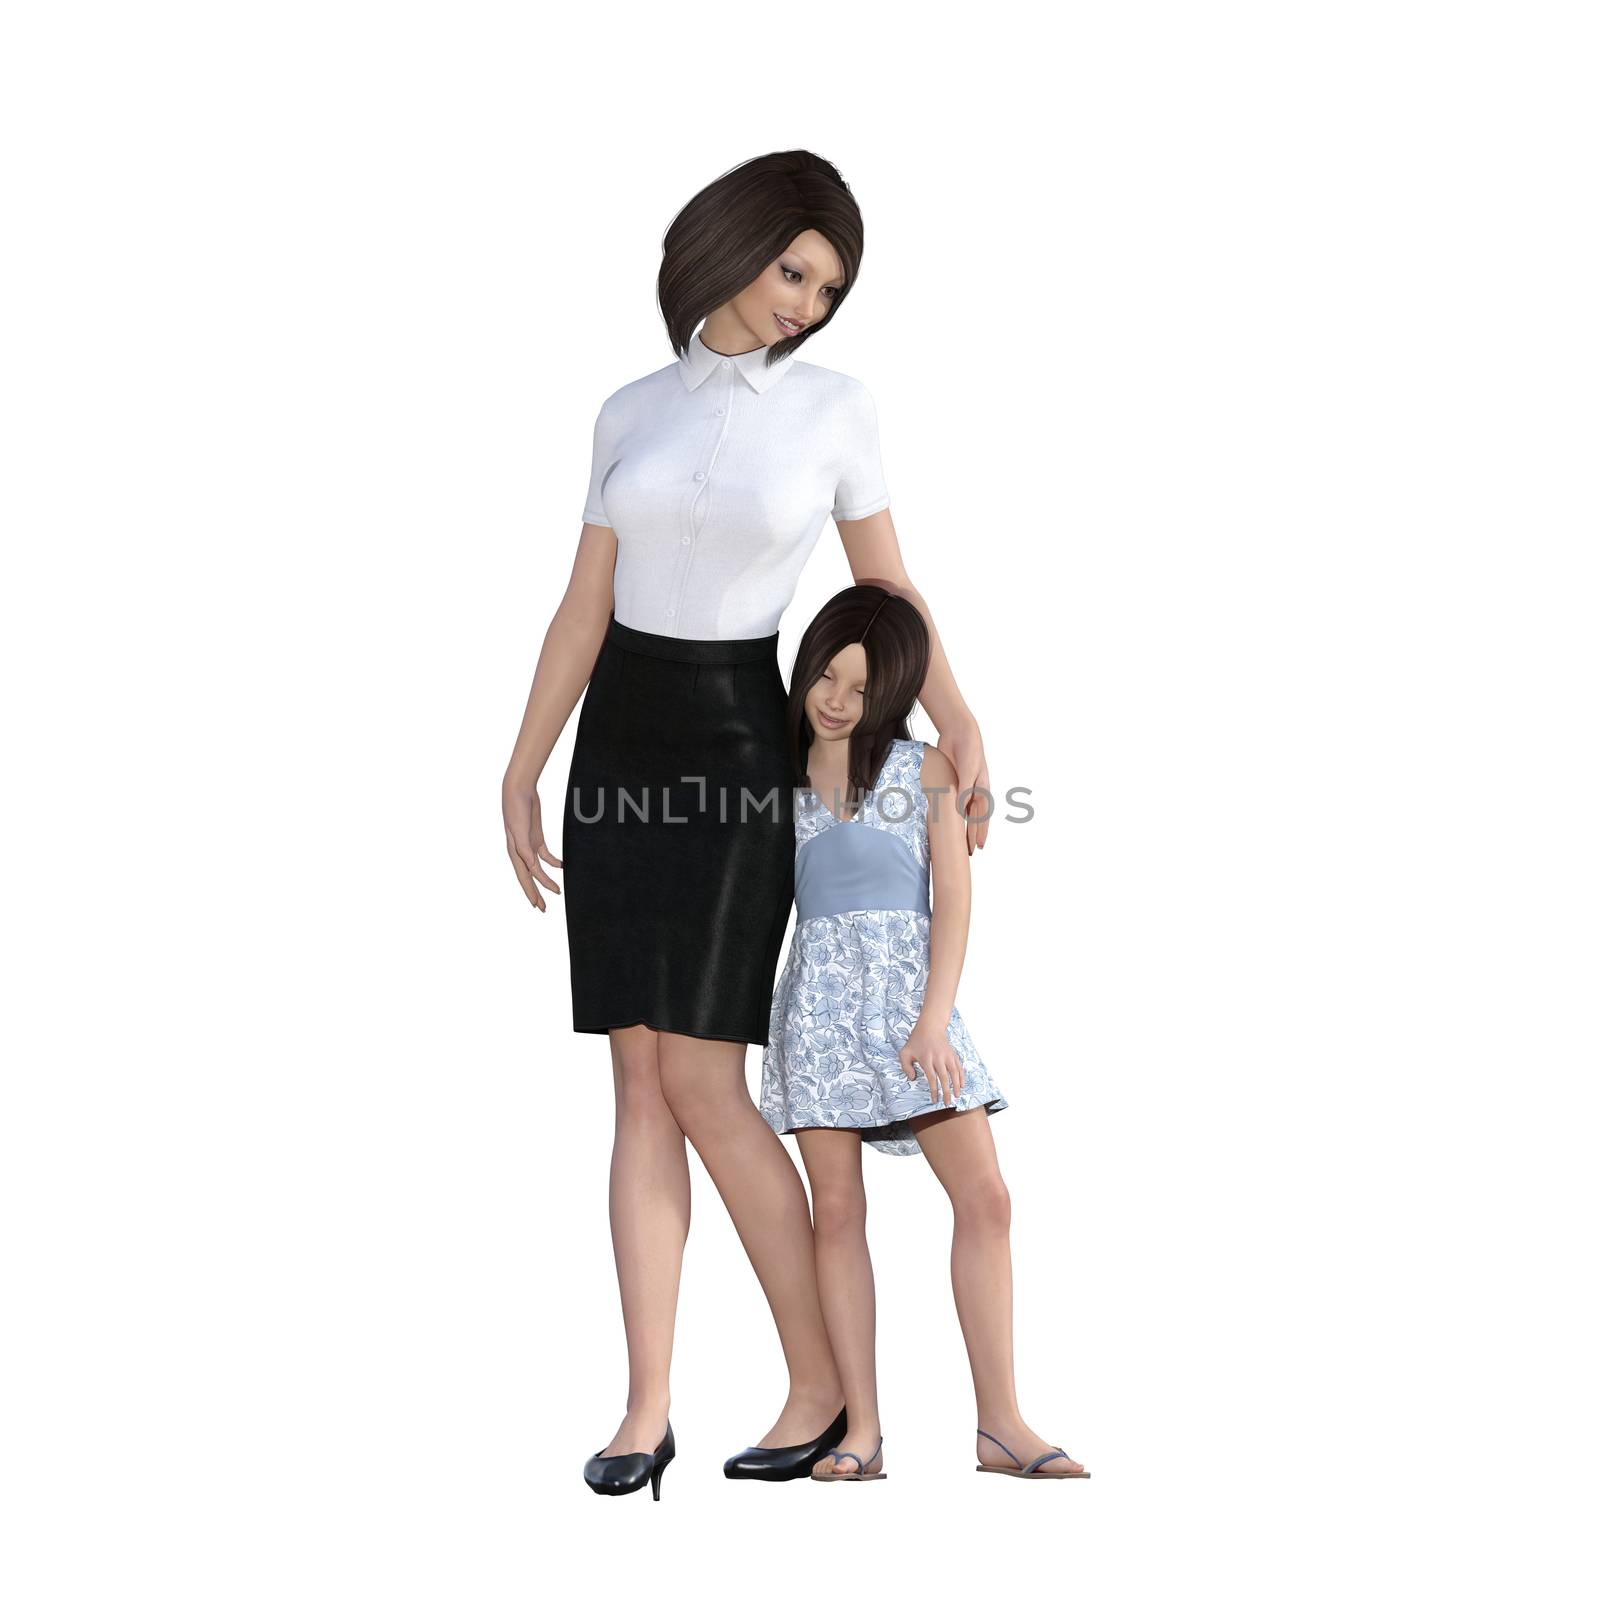 Mother Daughter Interaction of Mom Comforting Girl by kentoh